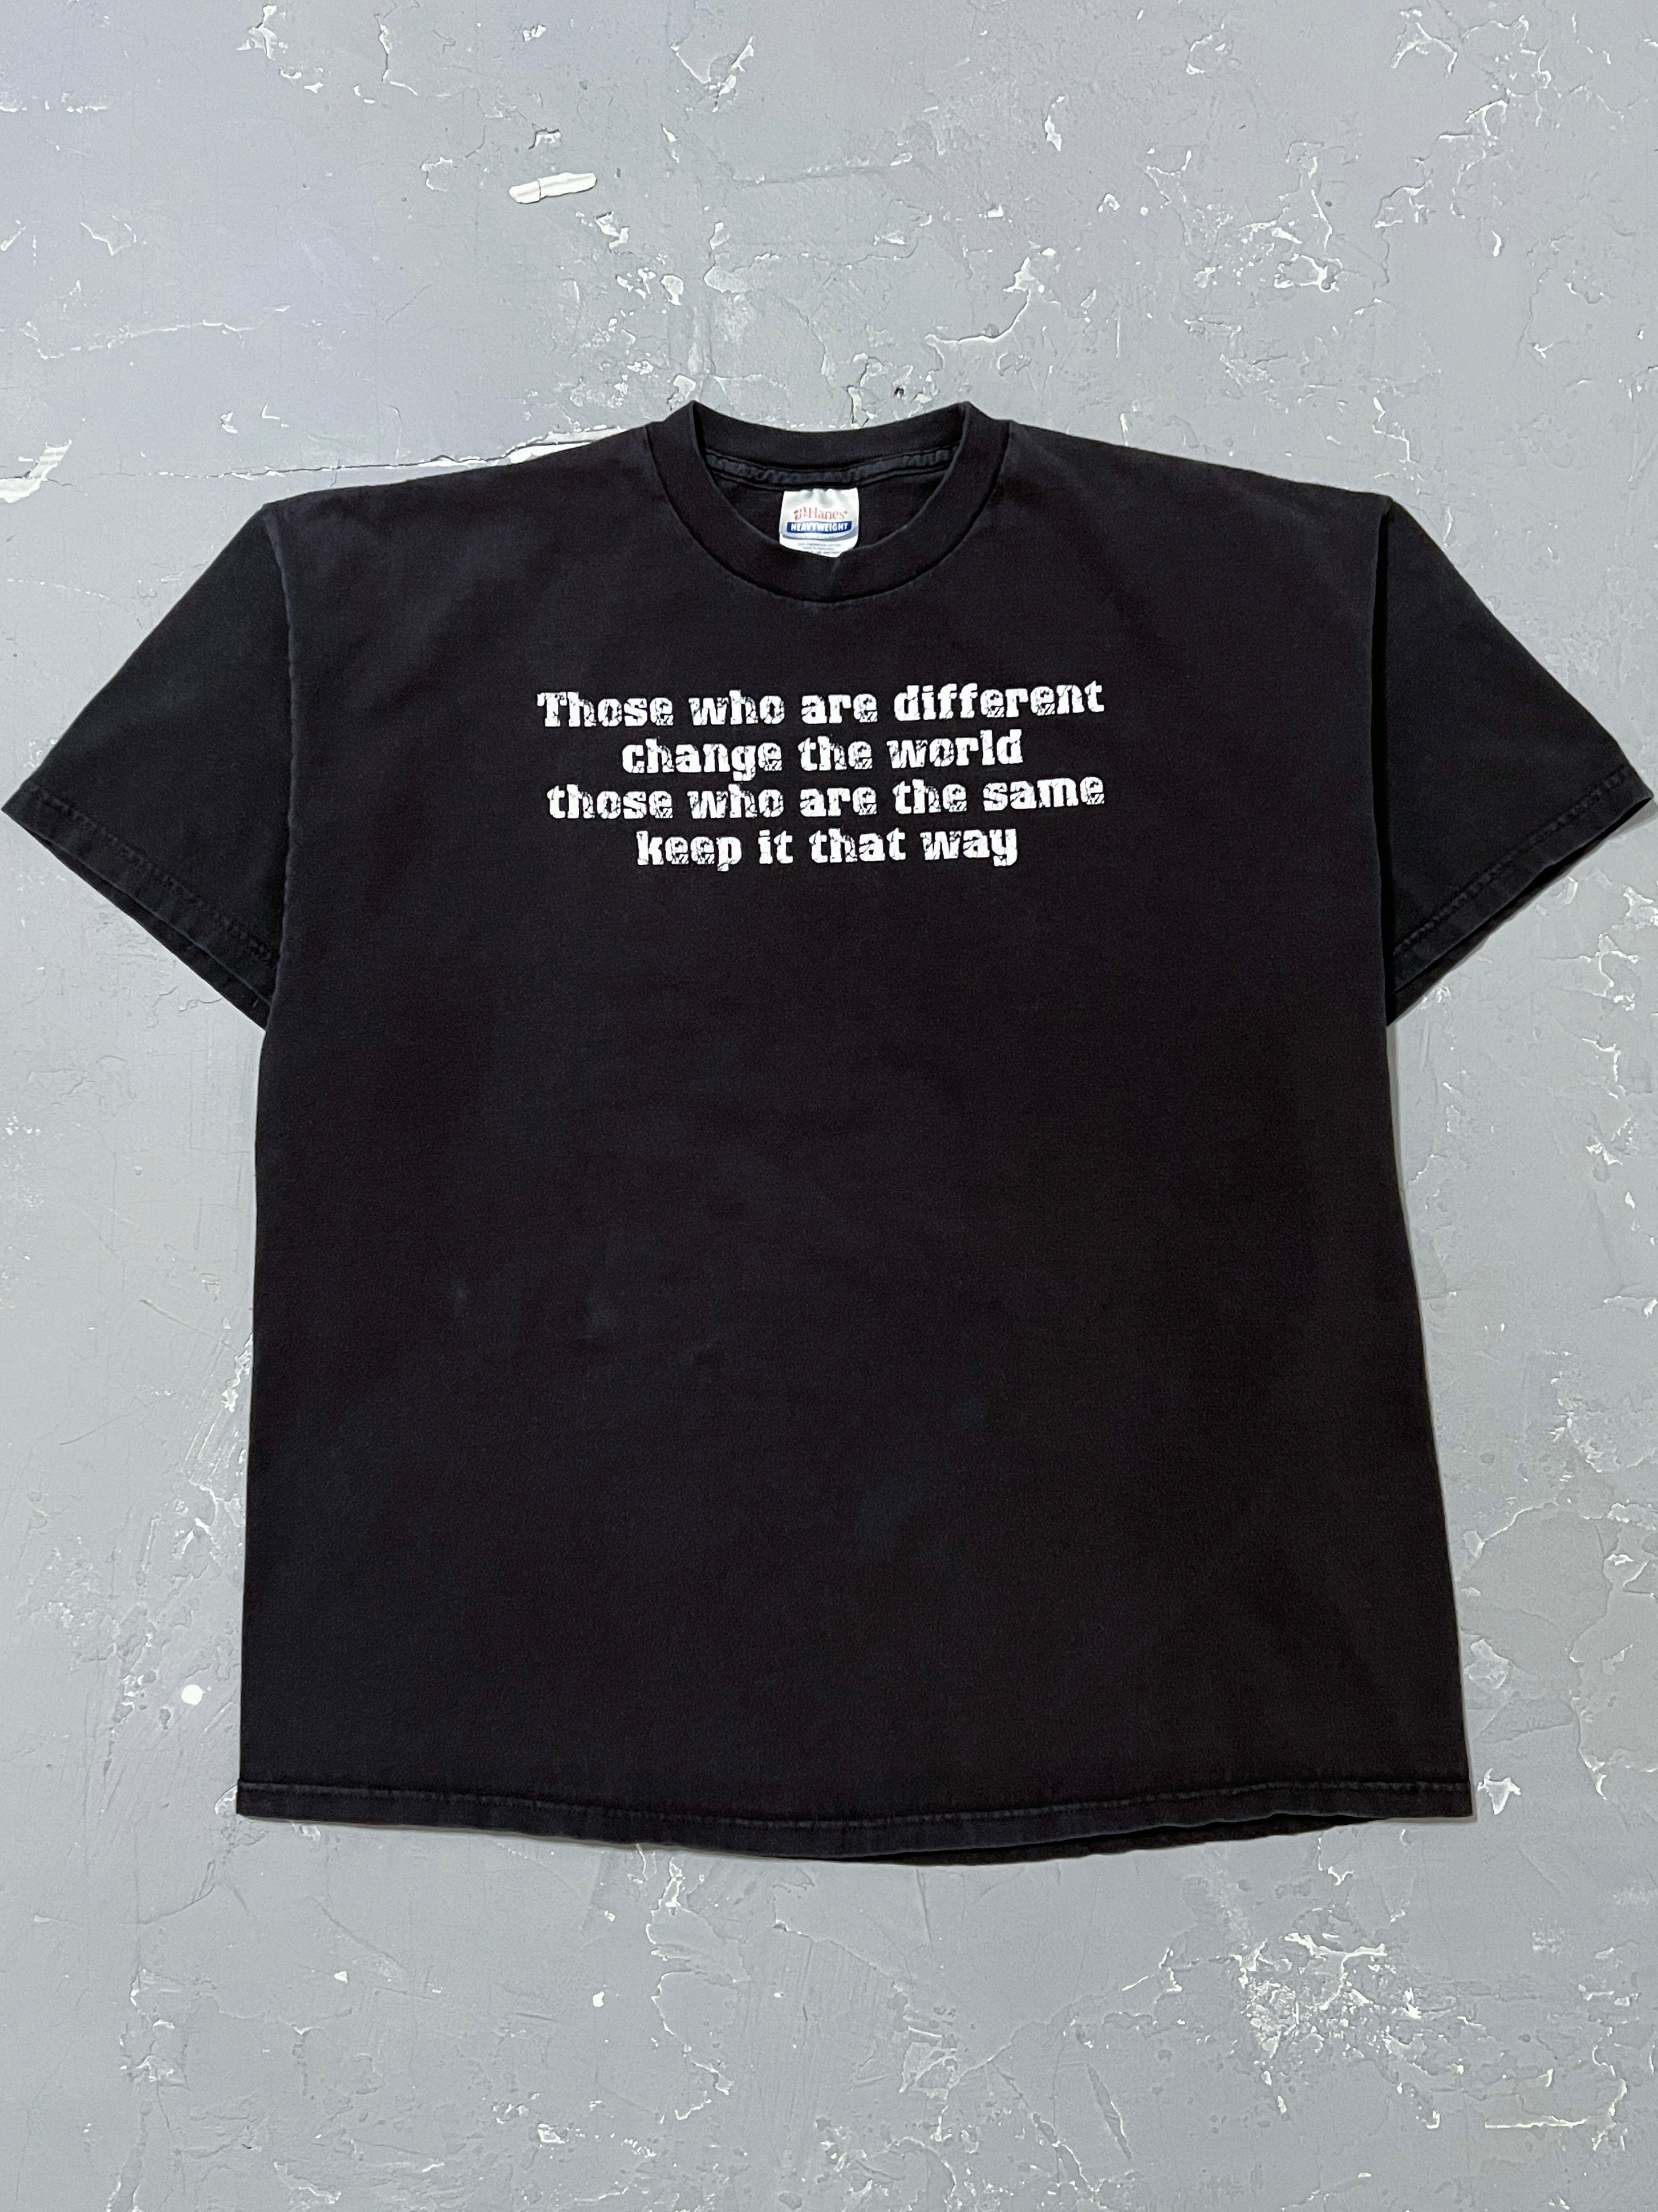 2000s “Those who are different change the world..” Tee [XL]